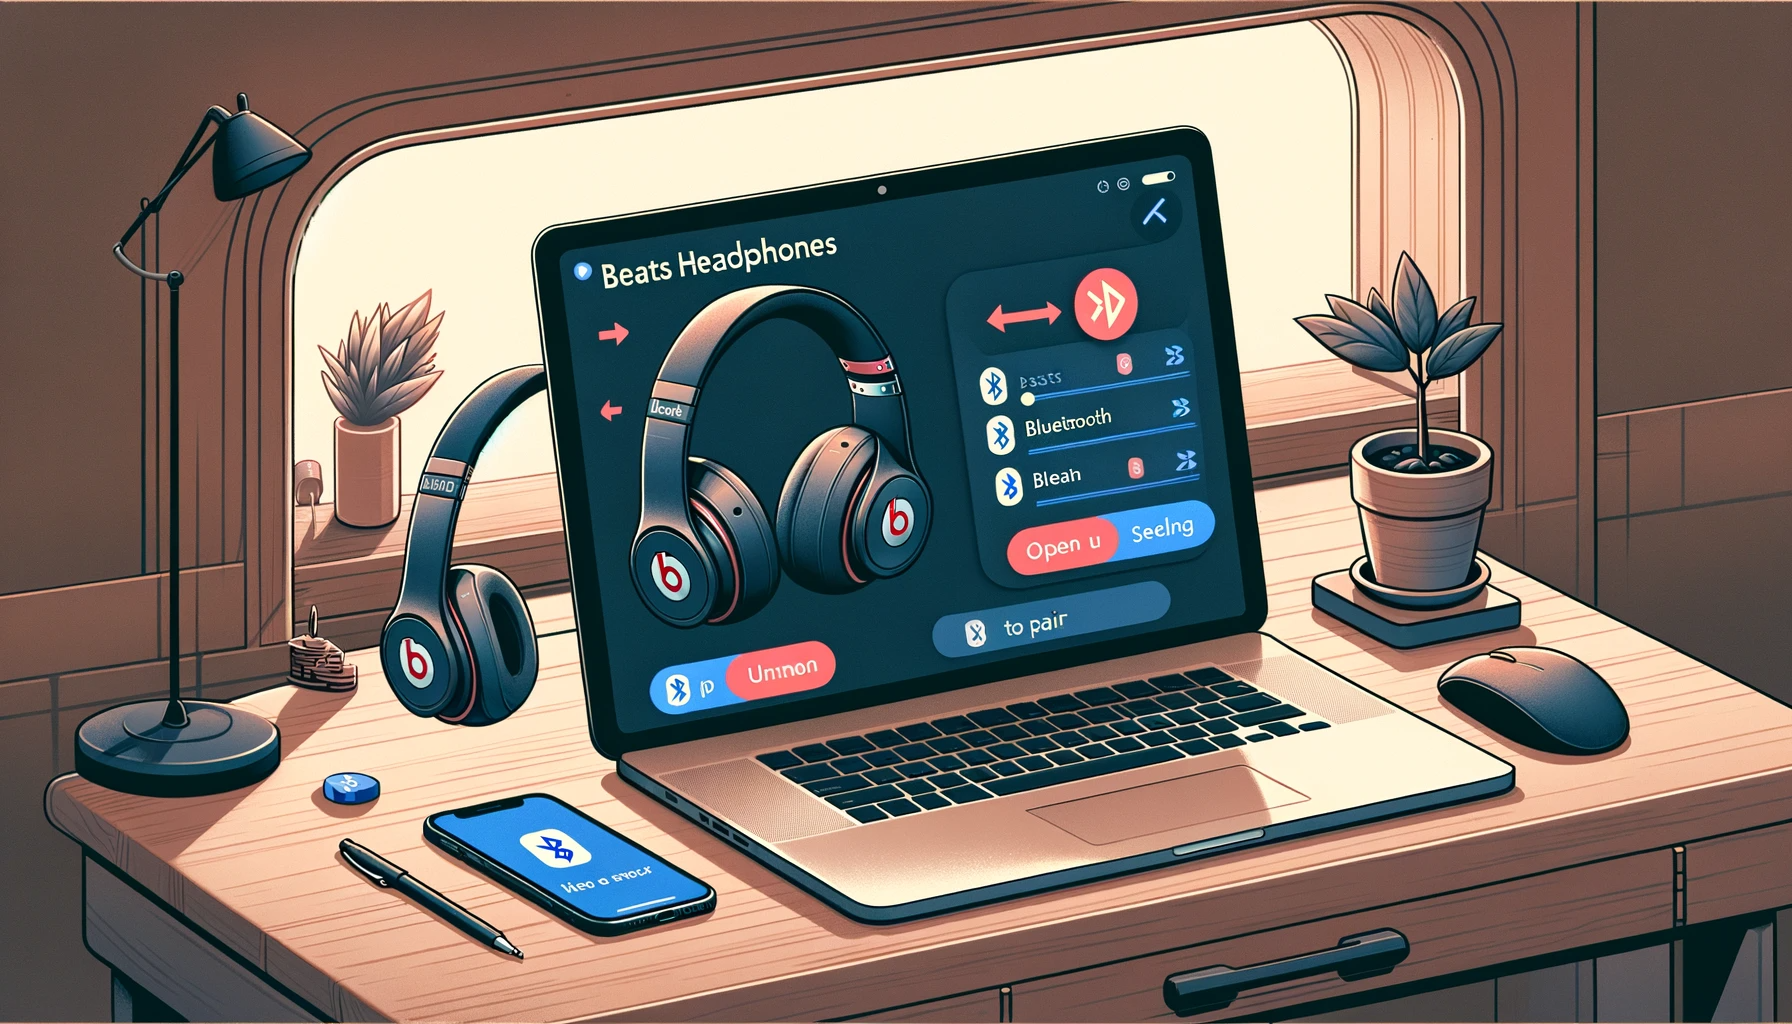 How to Connect Beats Headphones to MacBook? (Step-By-Step)